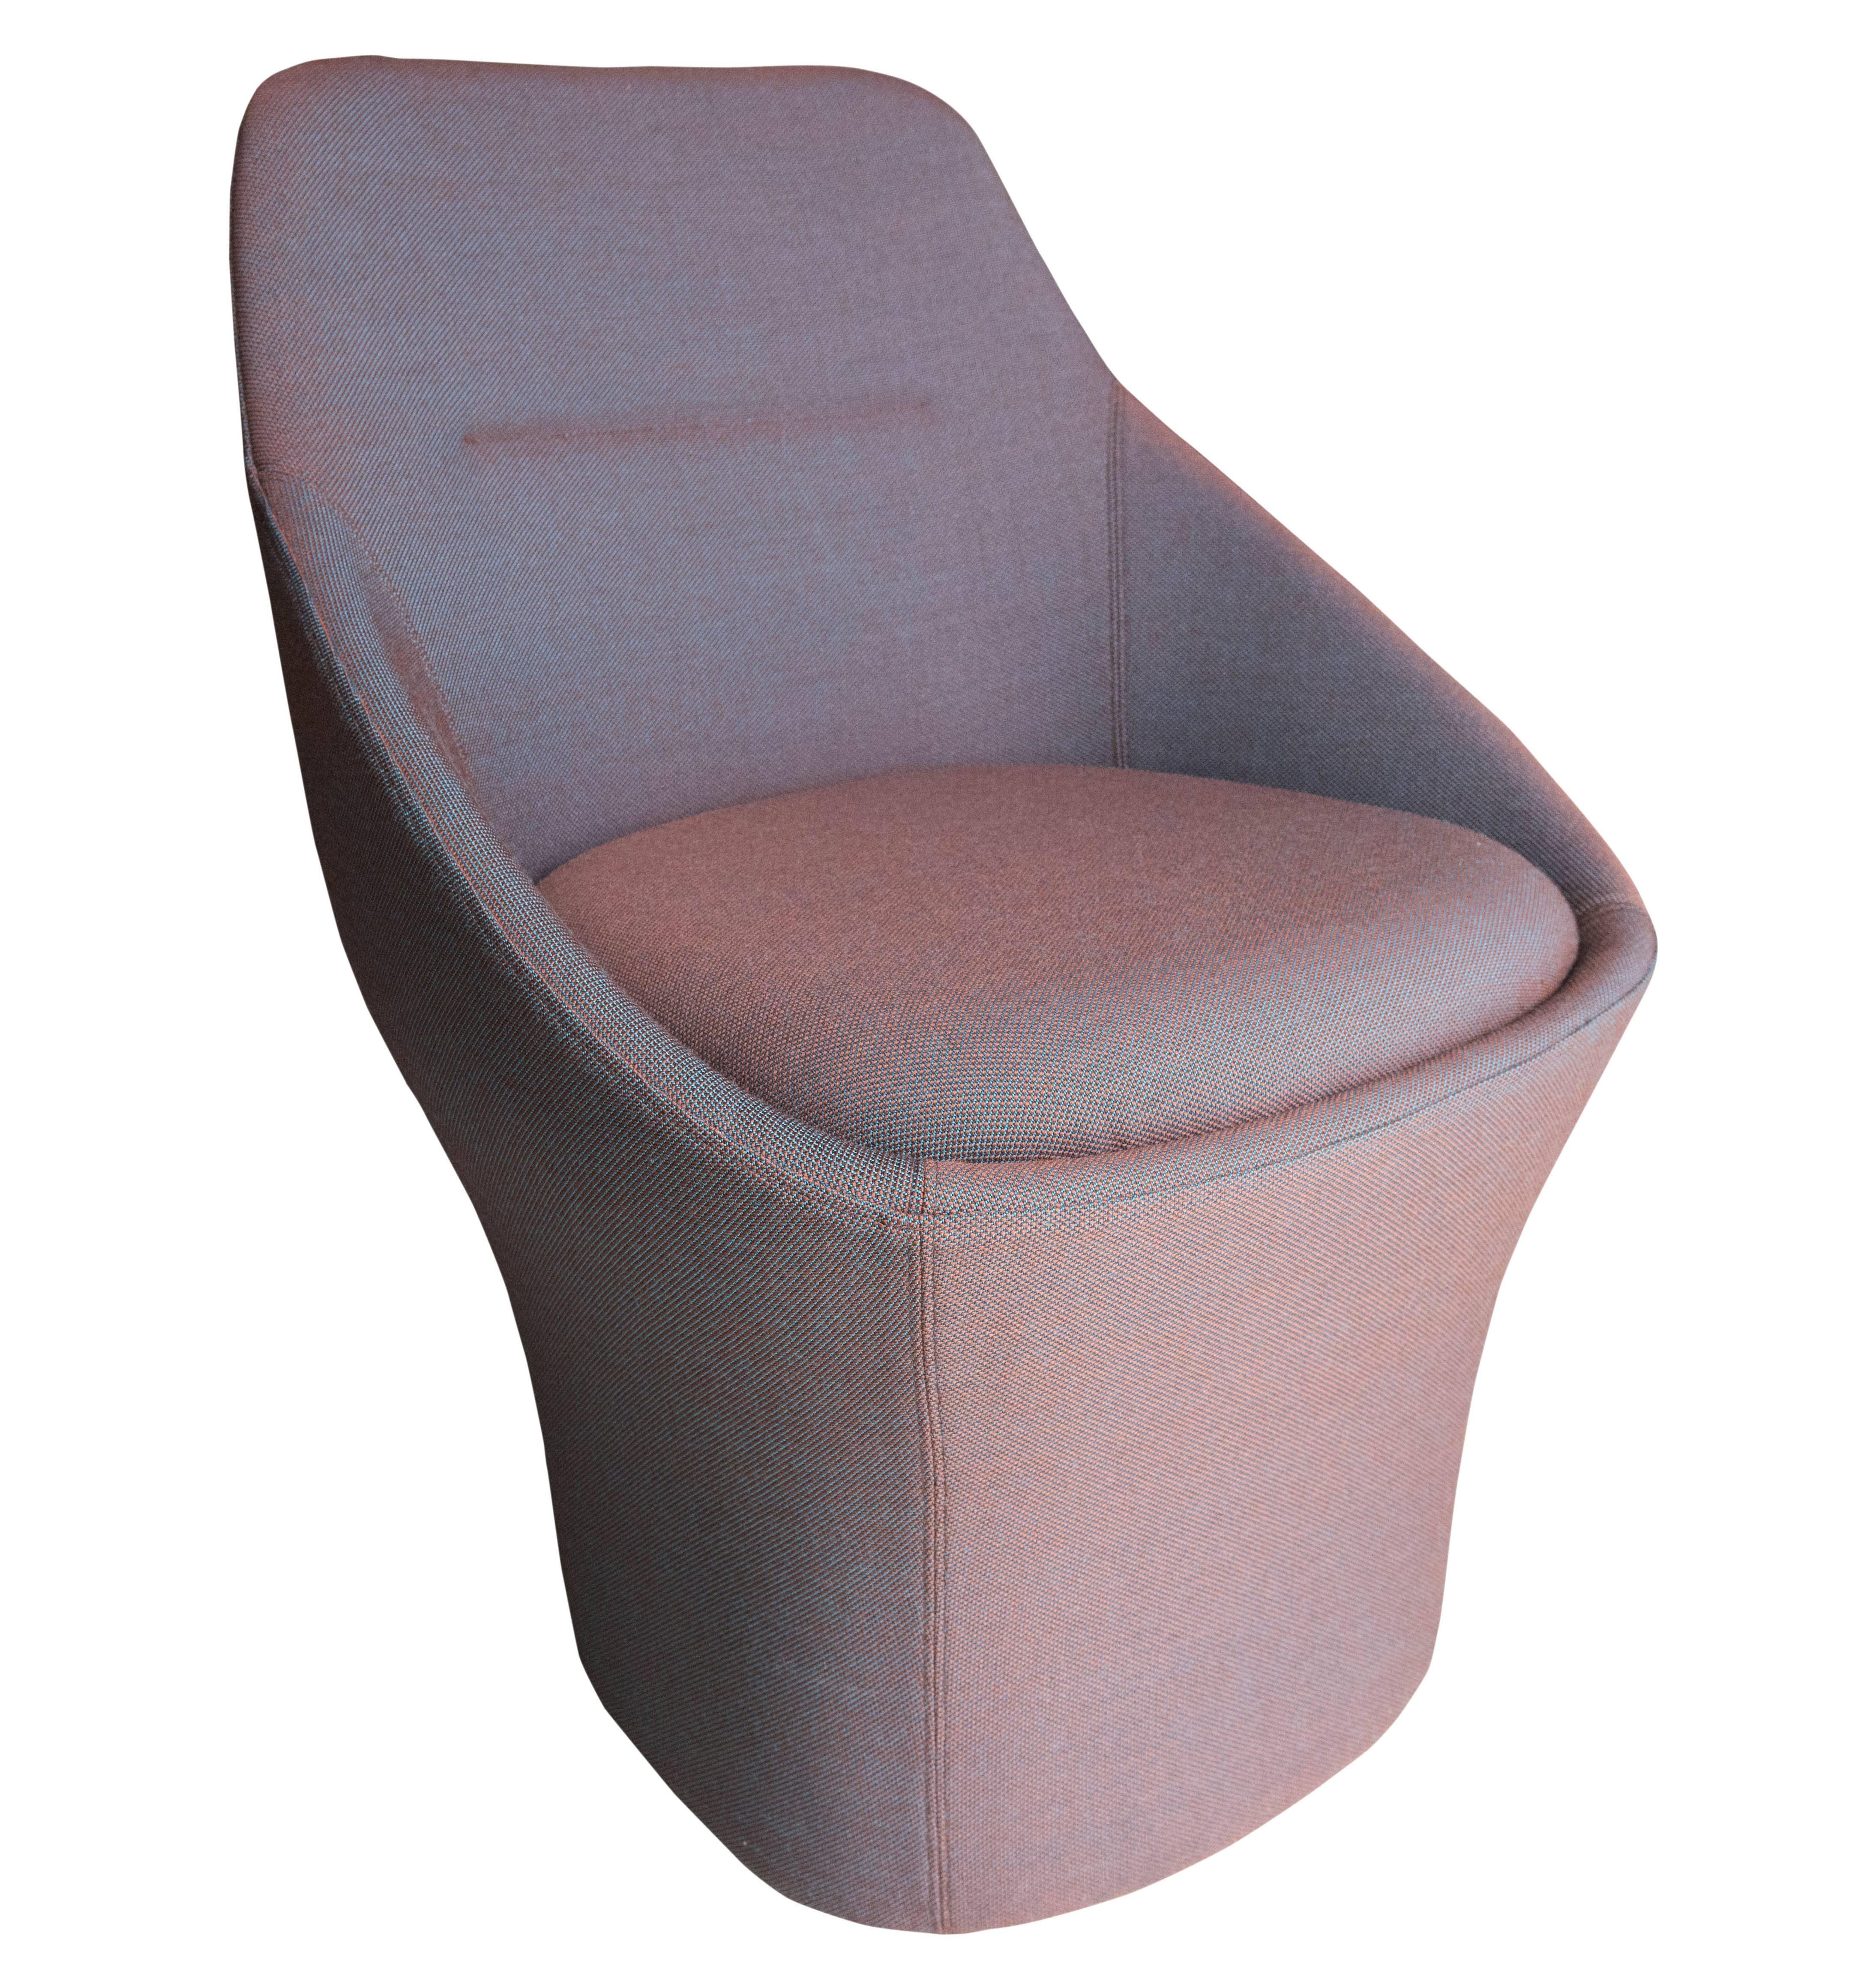 Offecct "Ezy" Chair For Sale